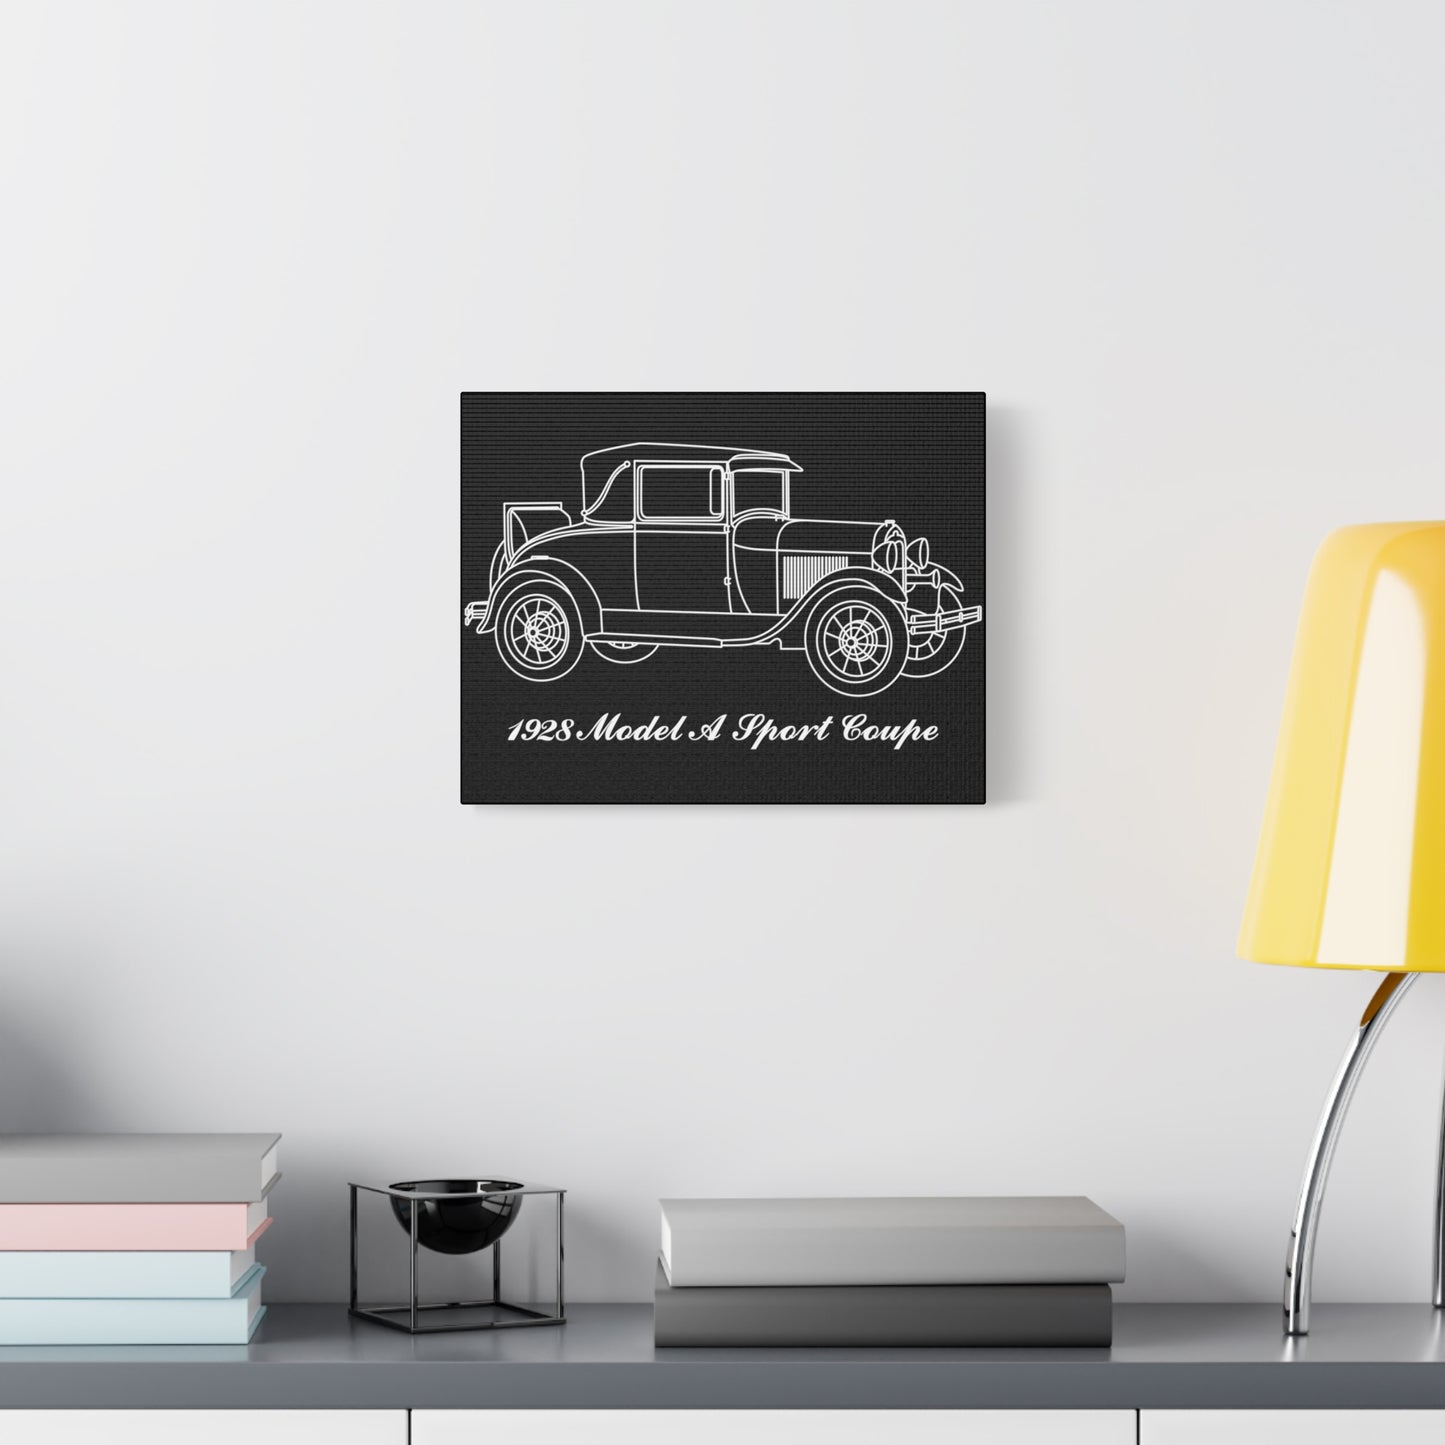 1928 Sport Coupe Black Canvas Wall Art